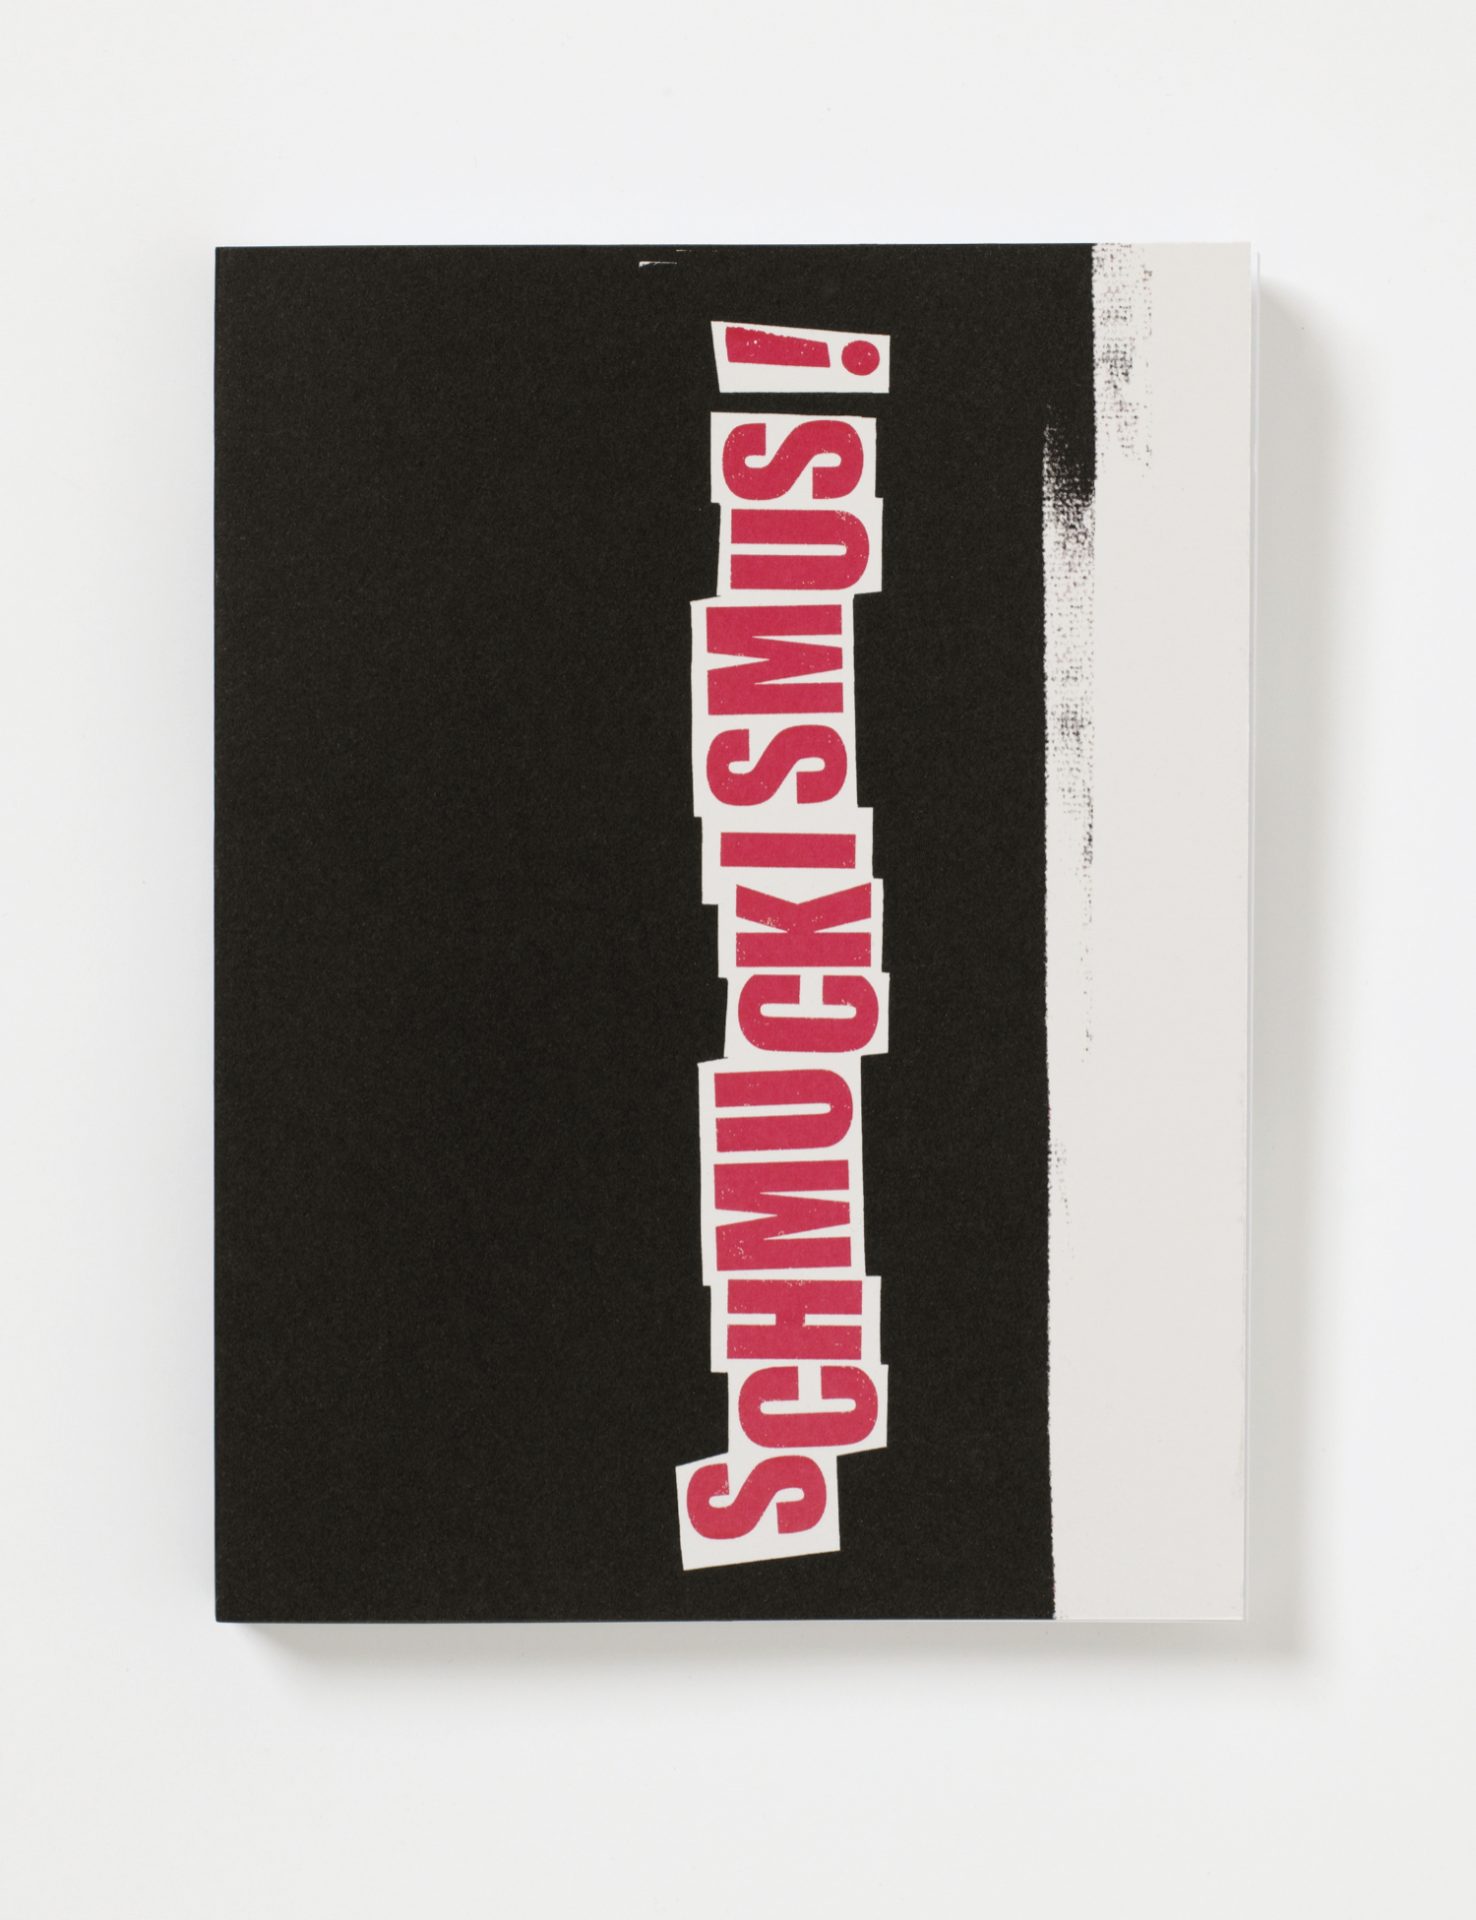 On a black background is the word Schmuckismus in red with a white border.